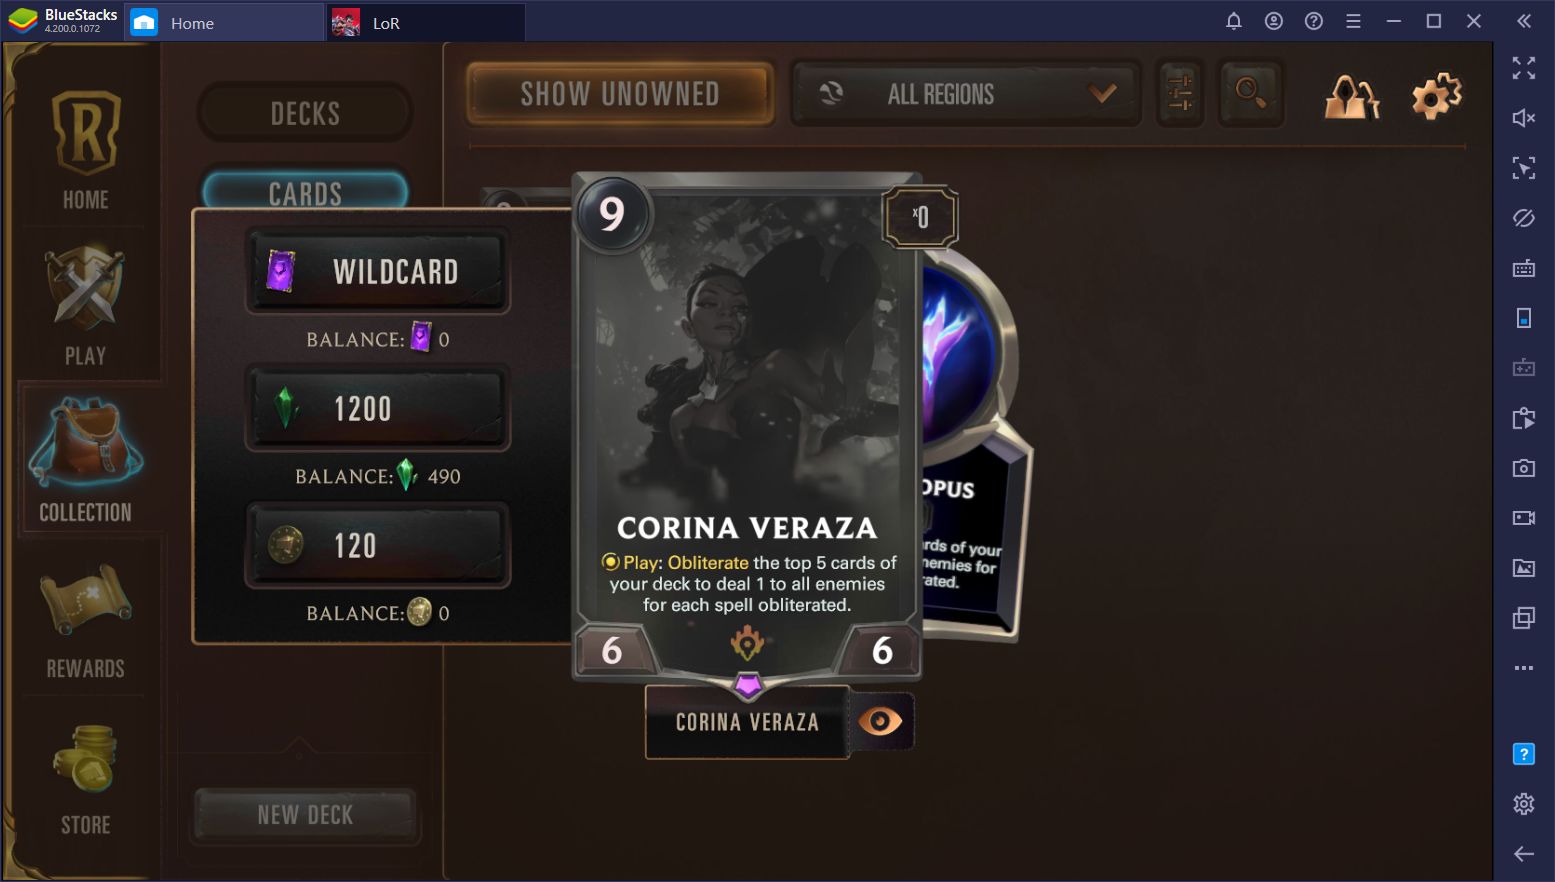 Legends of Runeterra on PC - The Best Deck Combinations (Updated April 2020)